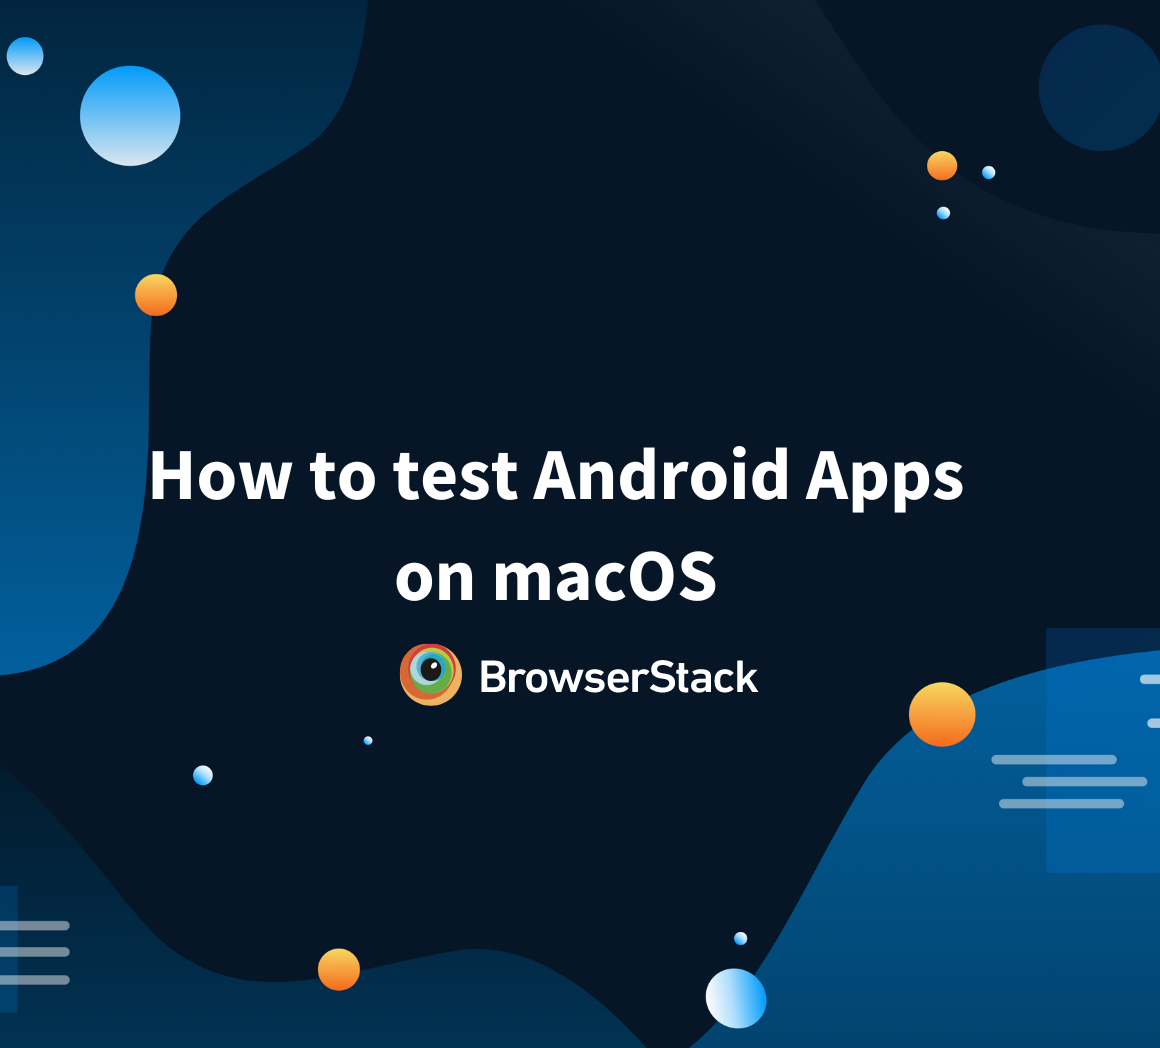 Test apps on Android